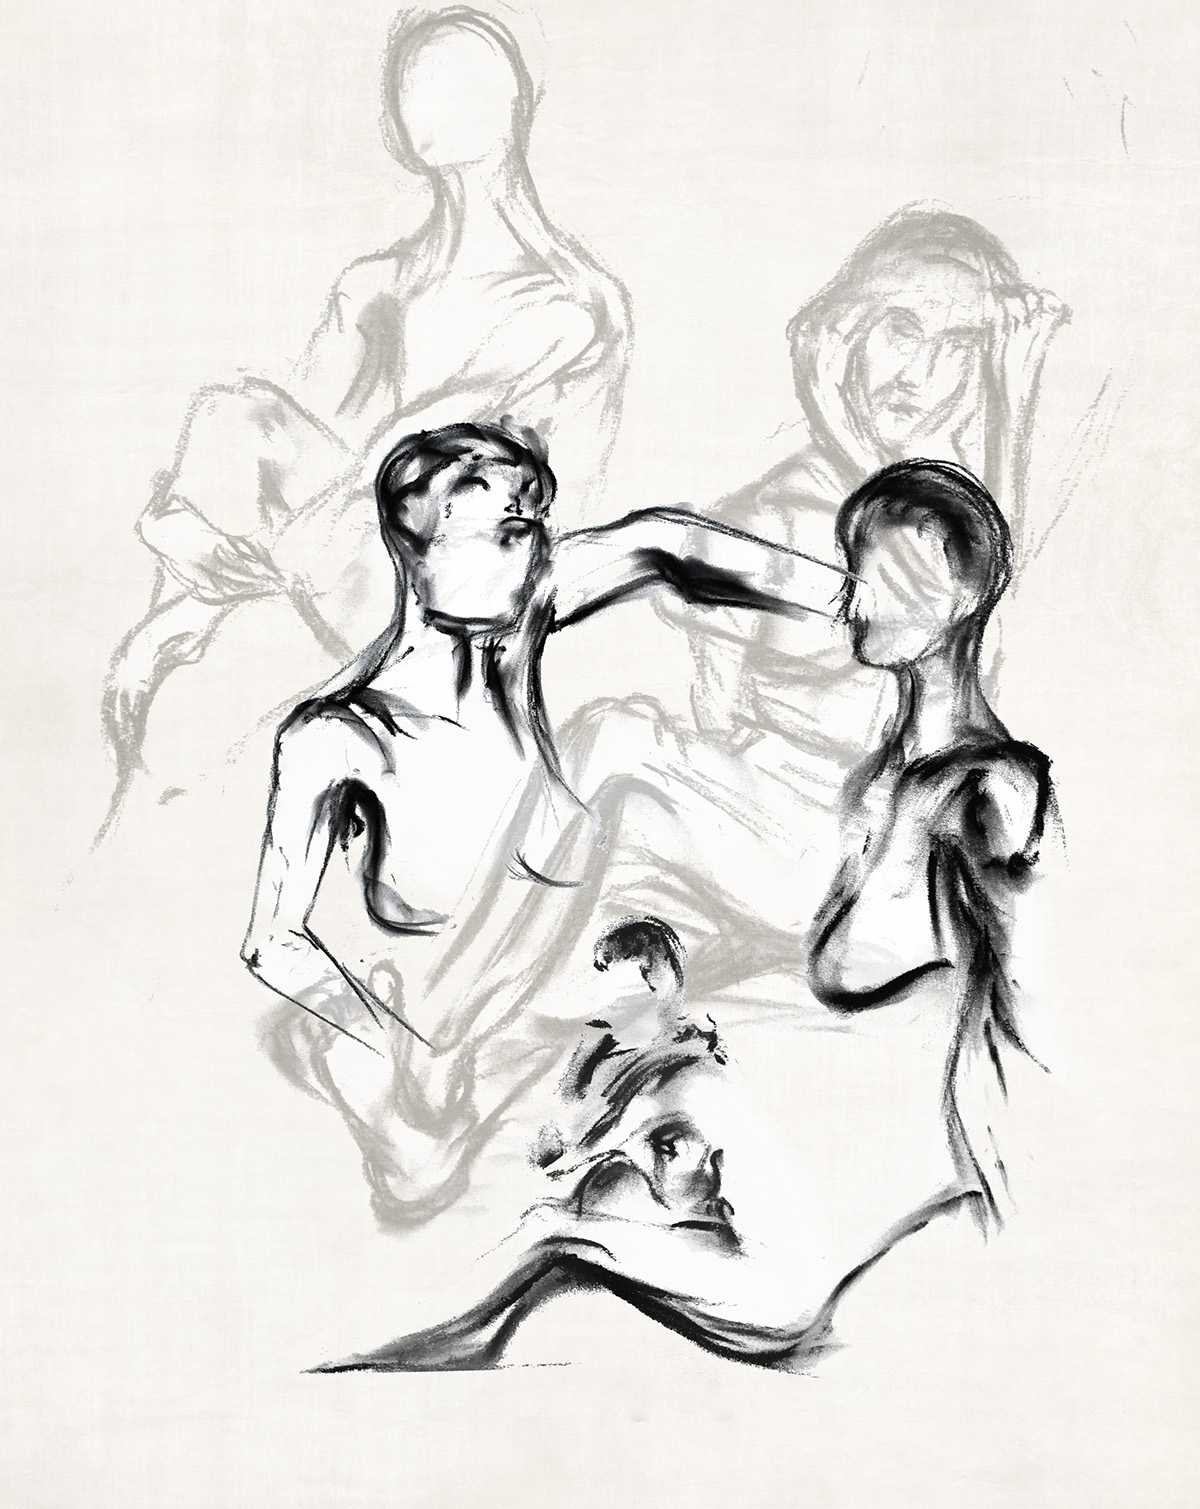 Life-drawing charcoal body study movement ink body DANCE  